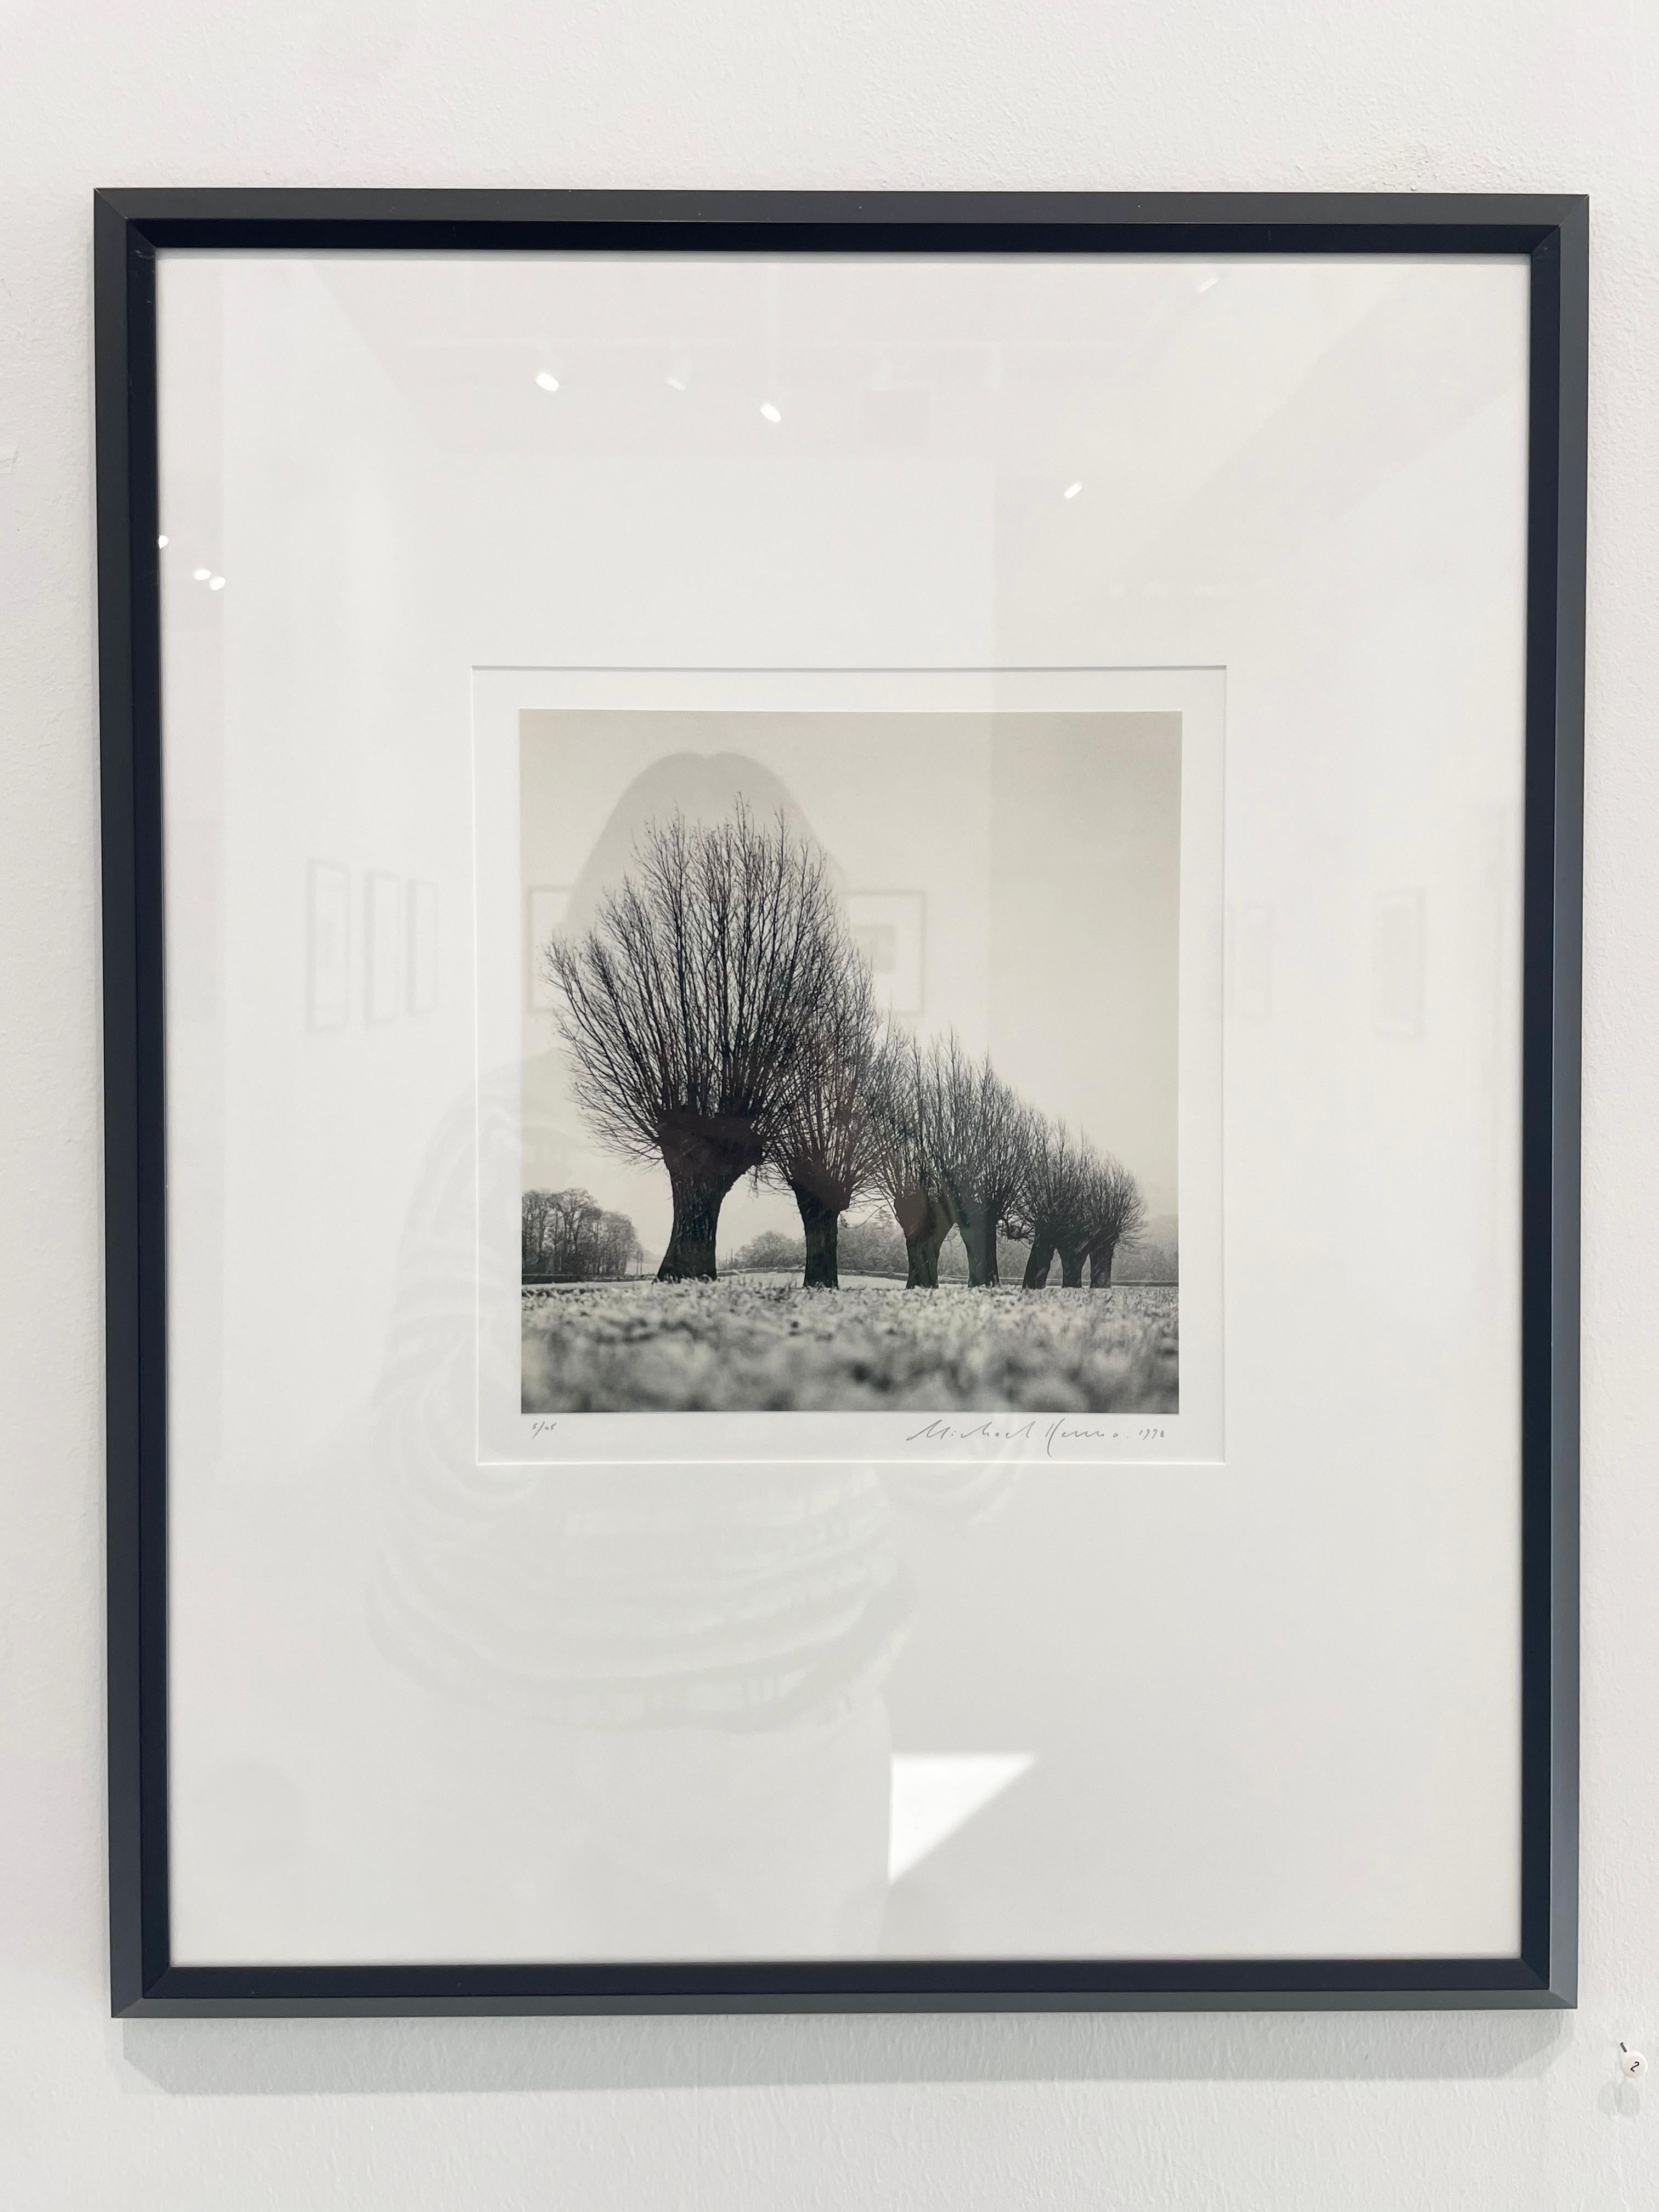 Edition of 45
Signed, titled, negative date, print date and numbered by Michael Kenna
Sepia toned gelatin silver print

Michael Kenna's black and white photographs are powerful and alluring. His imagery transports you to iconic and placid landscapes